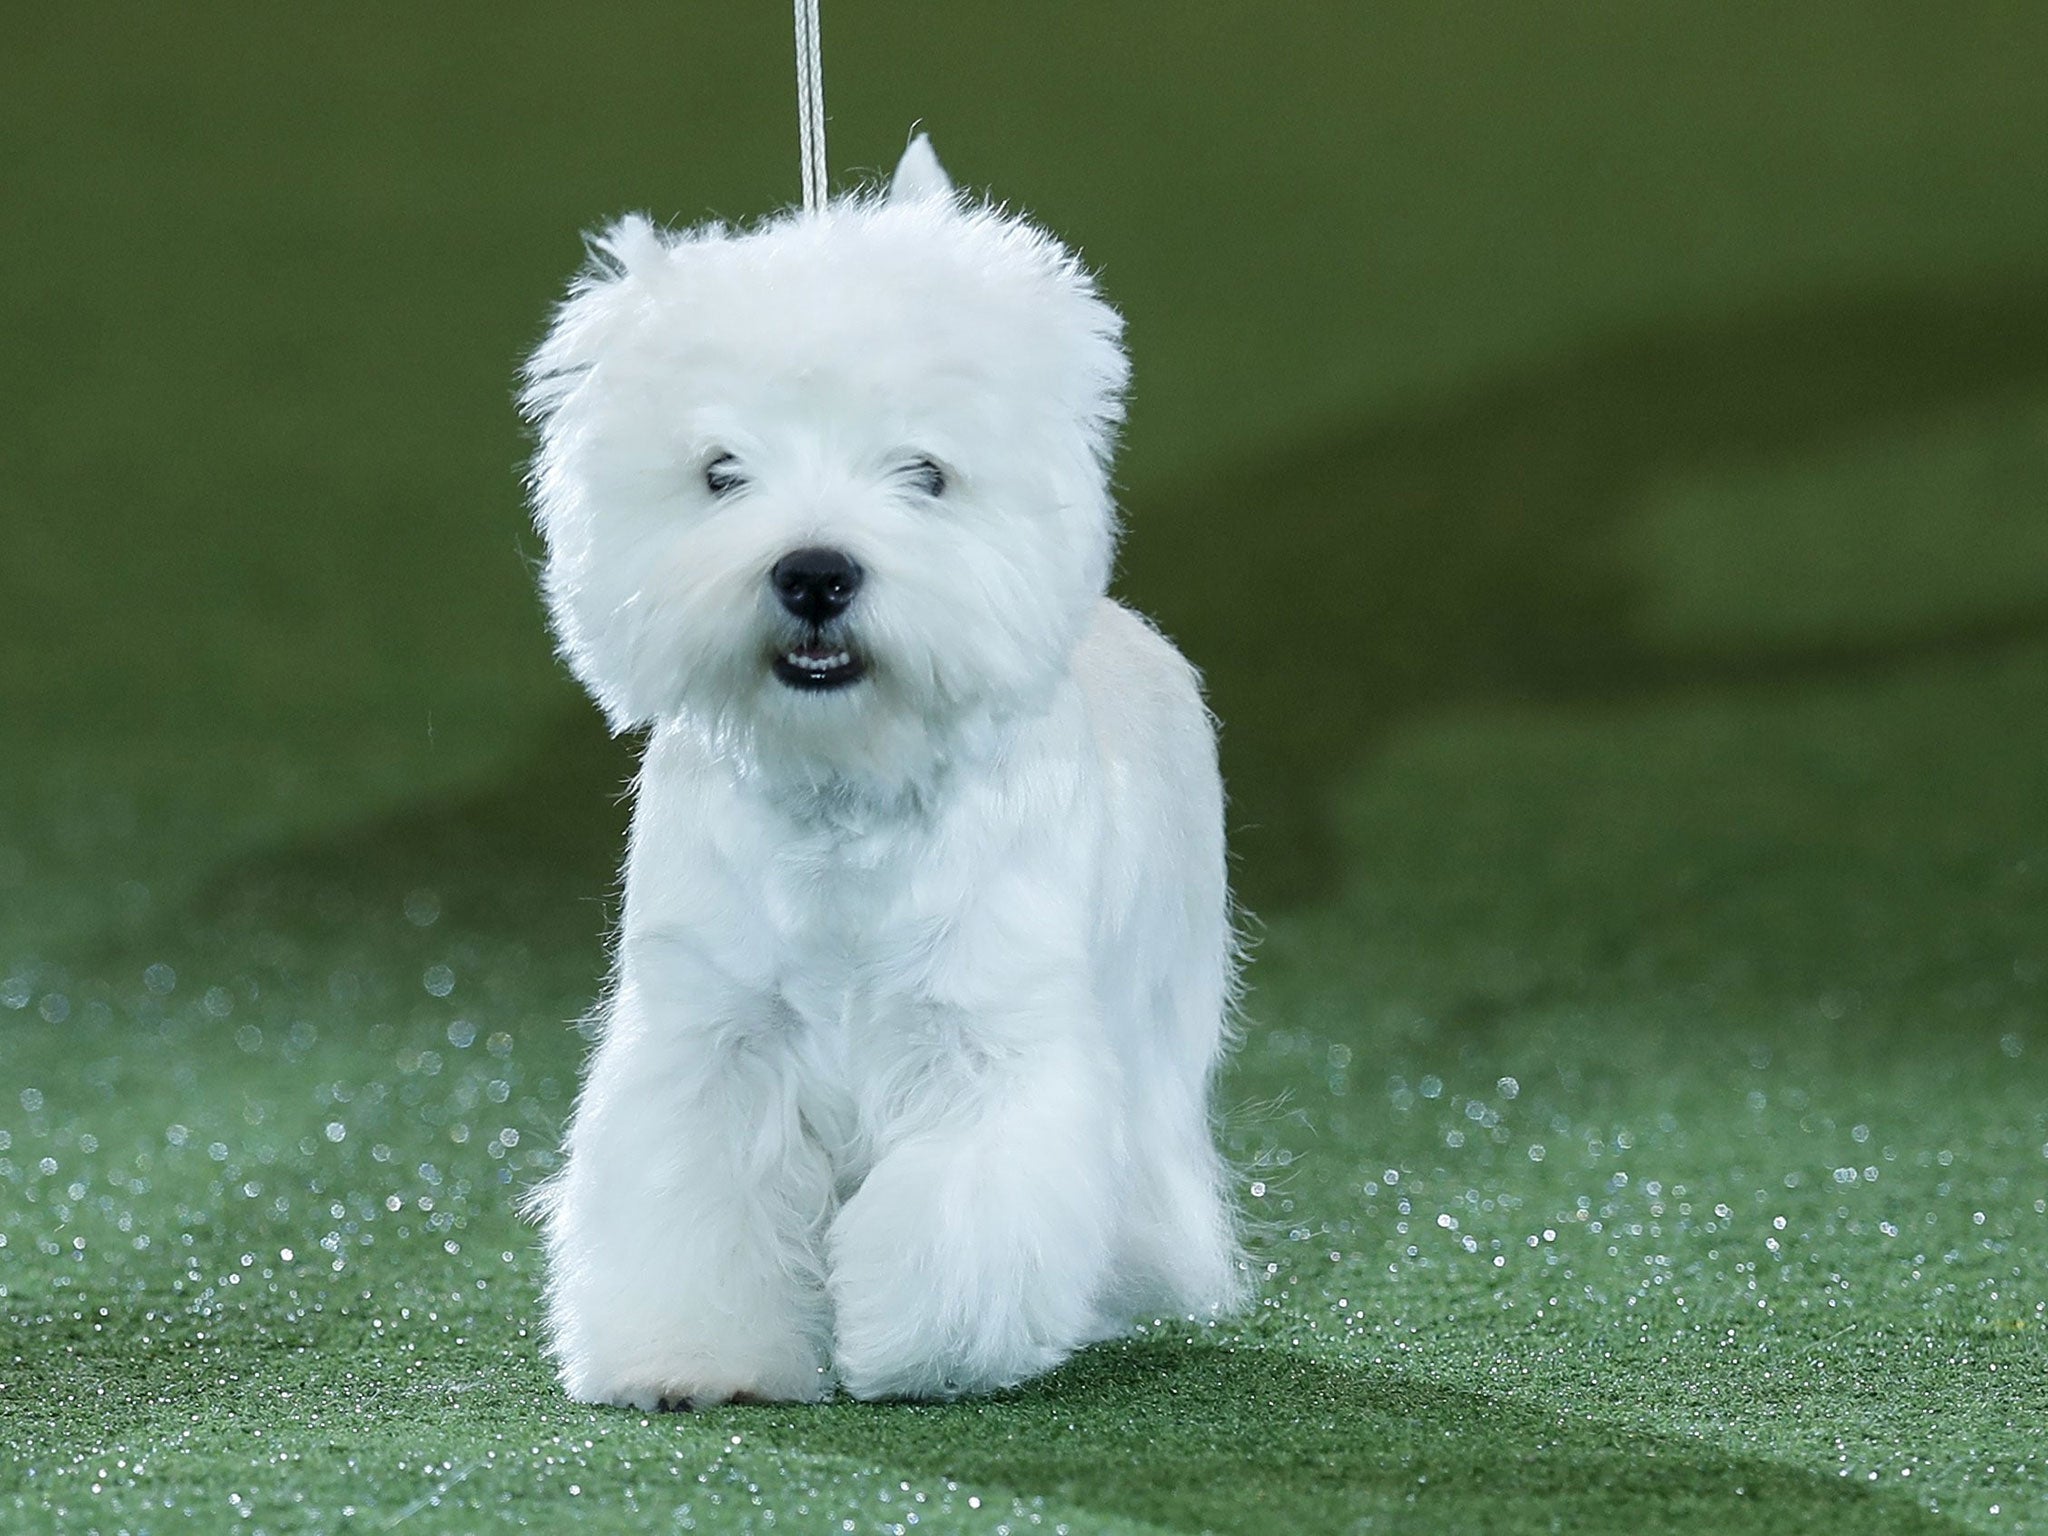 Crufts 2016: West Highland Terrier 'Geordie Girl' wins Best in Show | Home News | News ...